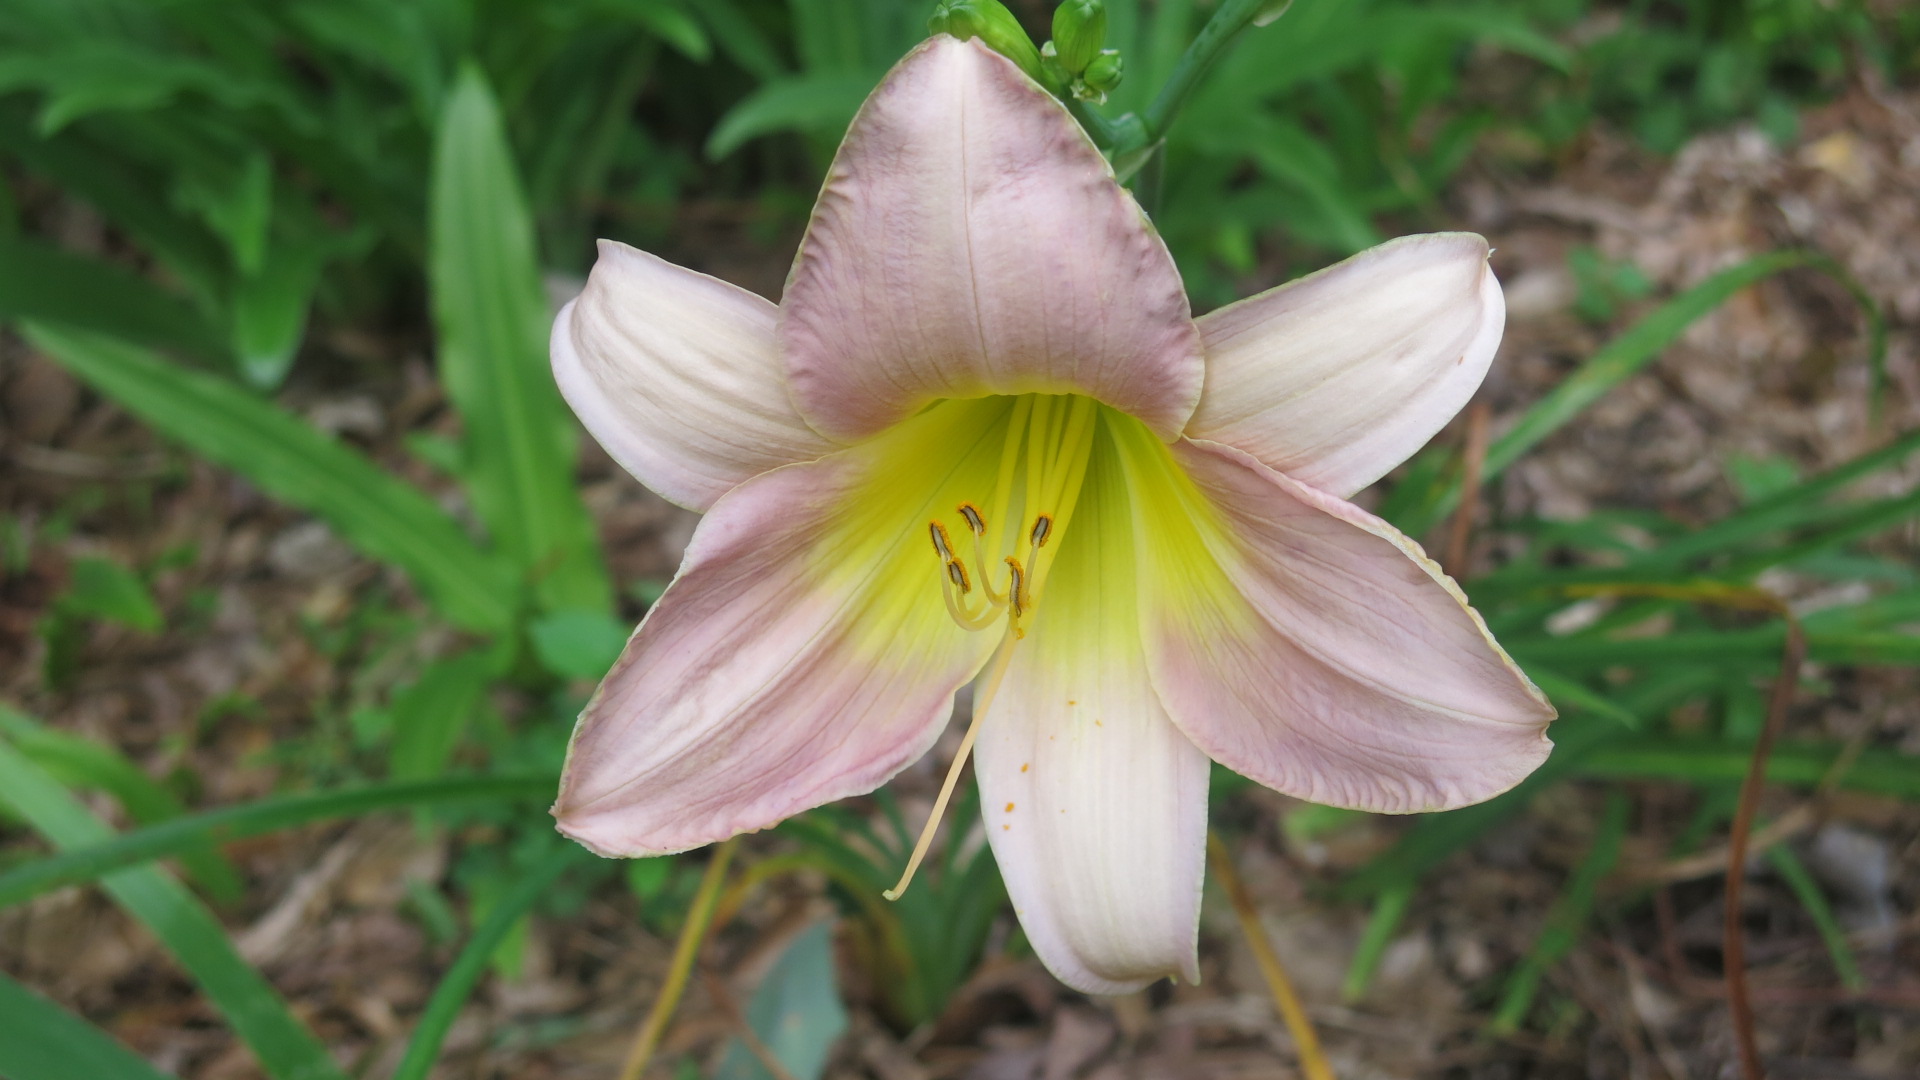 Hemerocallis 'Catherine Woodbery' has soft lavender petals with paler sepals and a wide, glowing chartreuse heart.